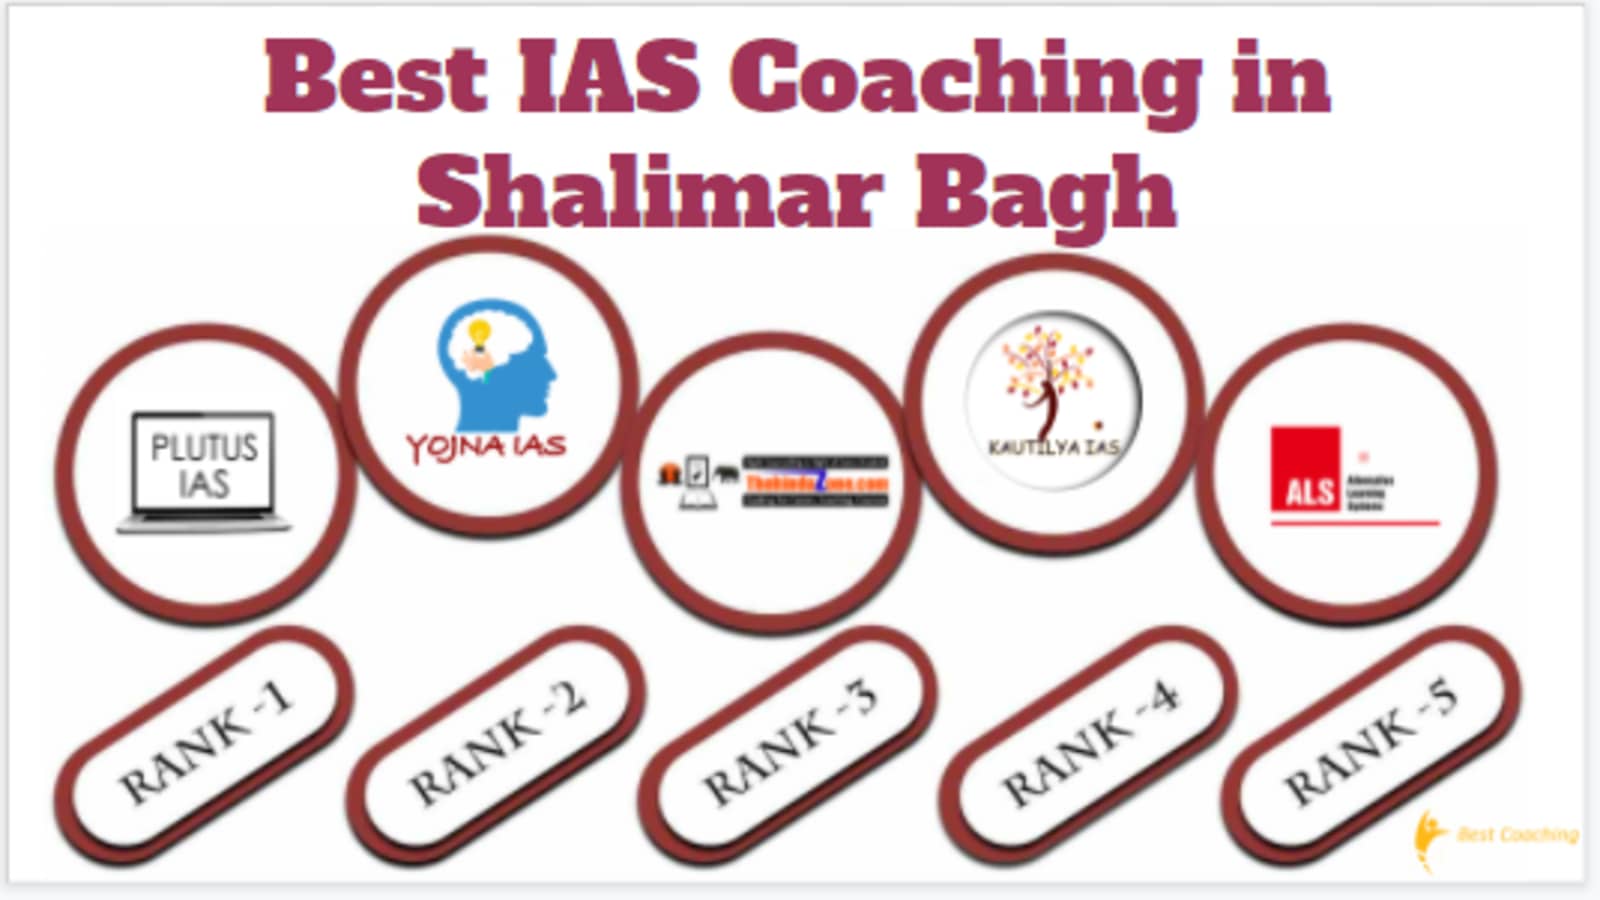 Best IAS Coaching in Shalimar Bagh